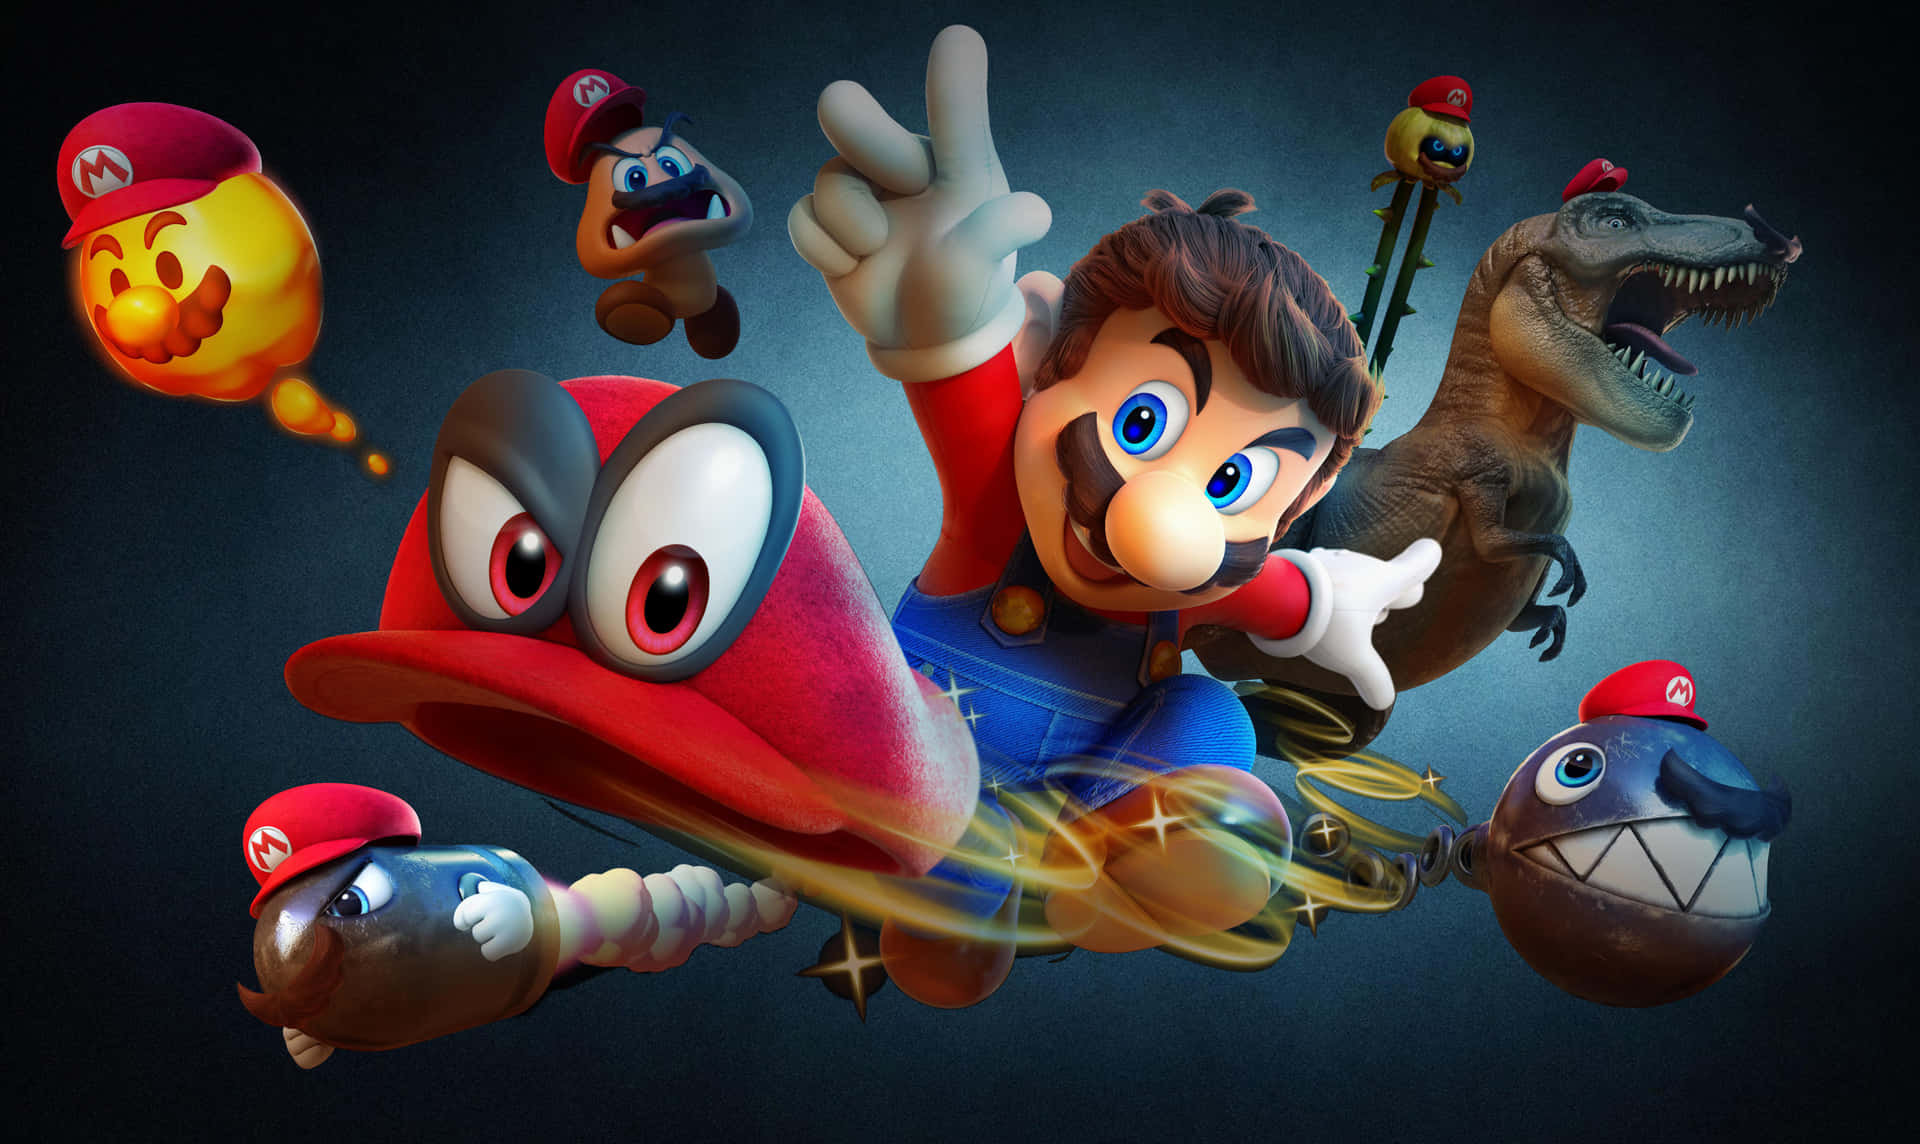 Blast off with Cool Mario Wallpaper